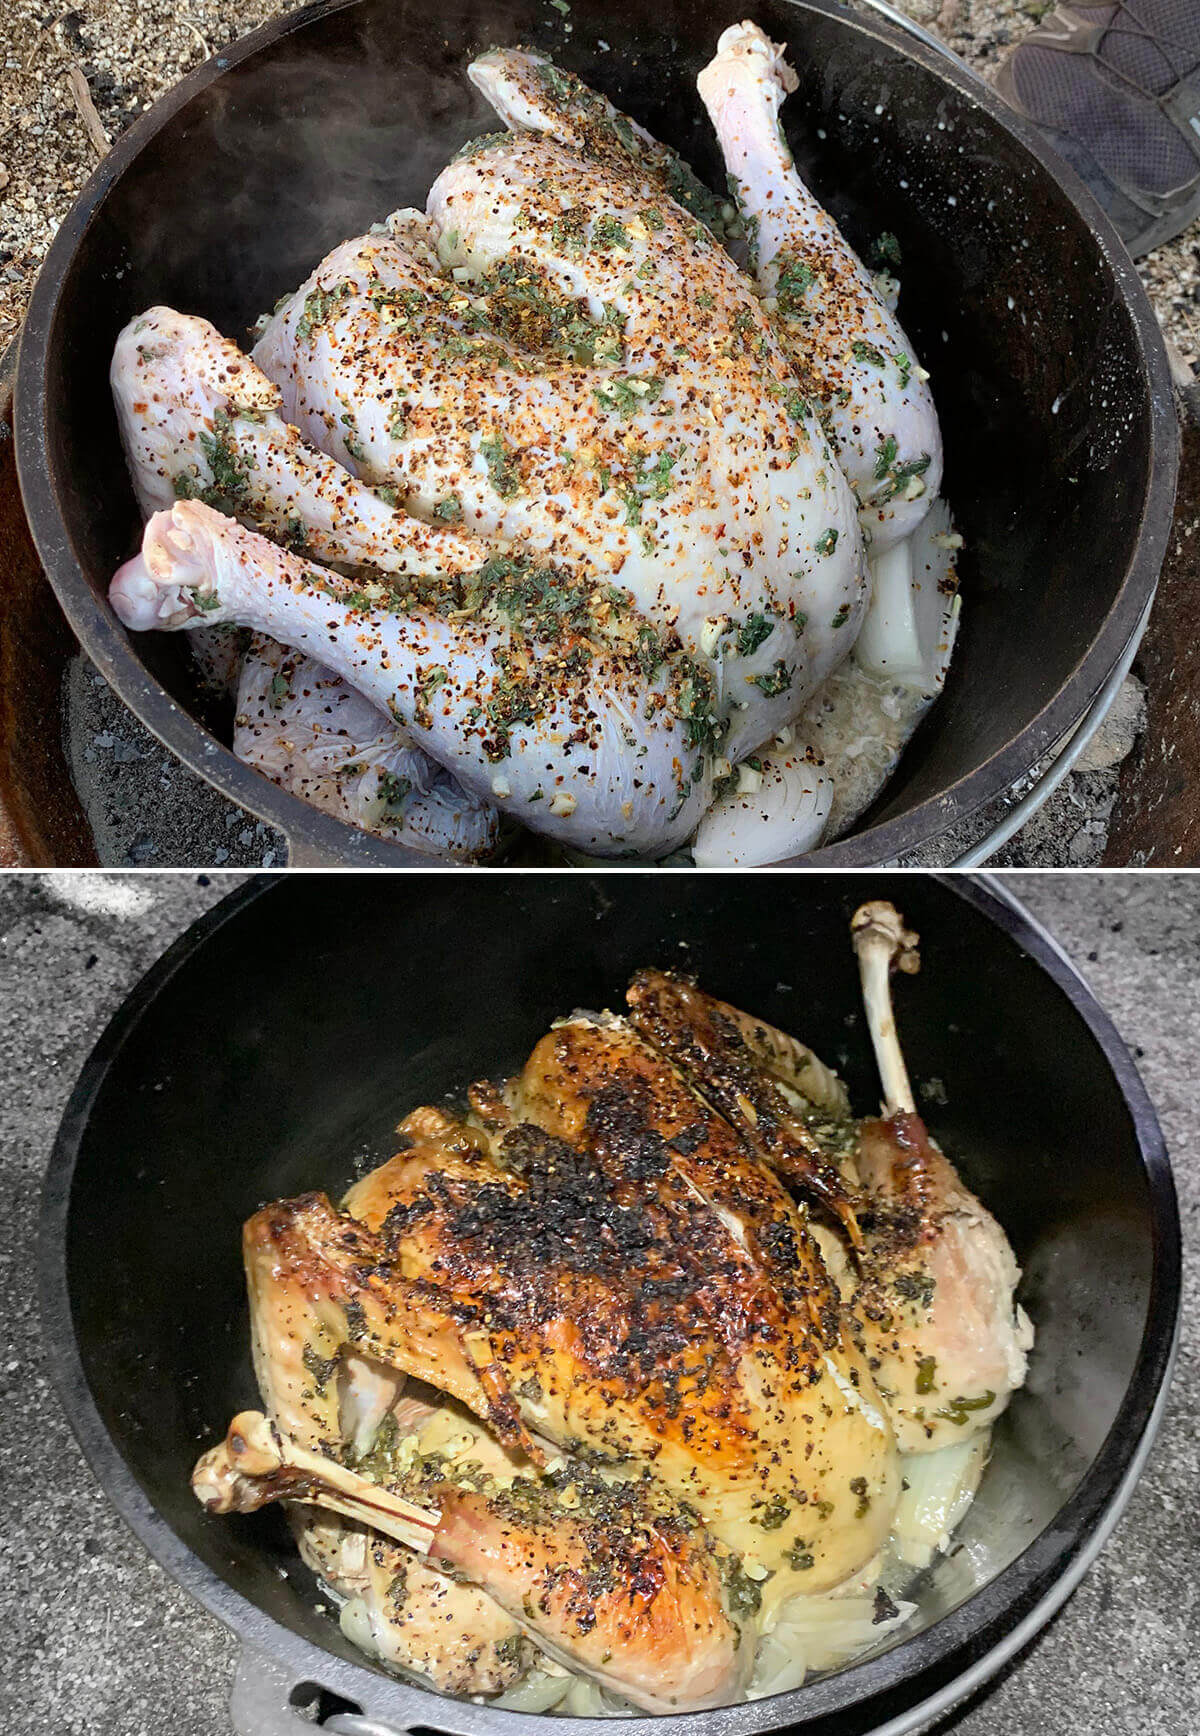 Collage of 2 pics showing a reader's Dutch oven turkey on a camping trip